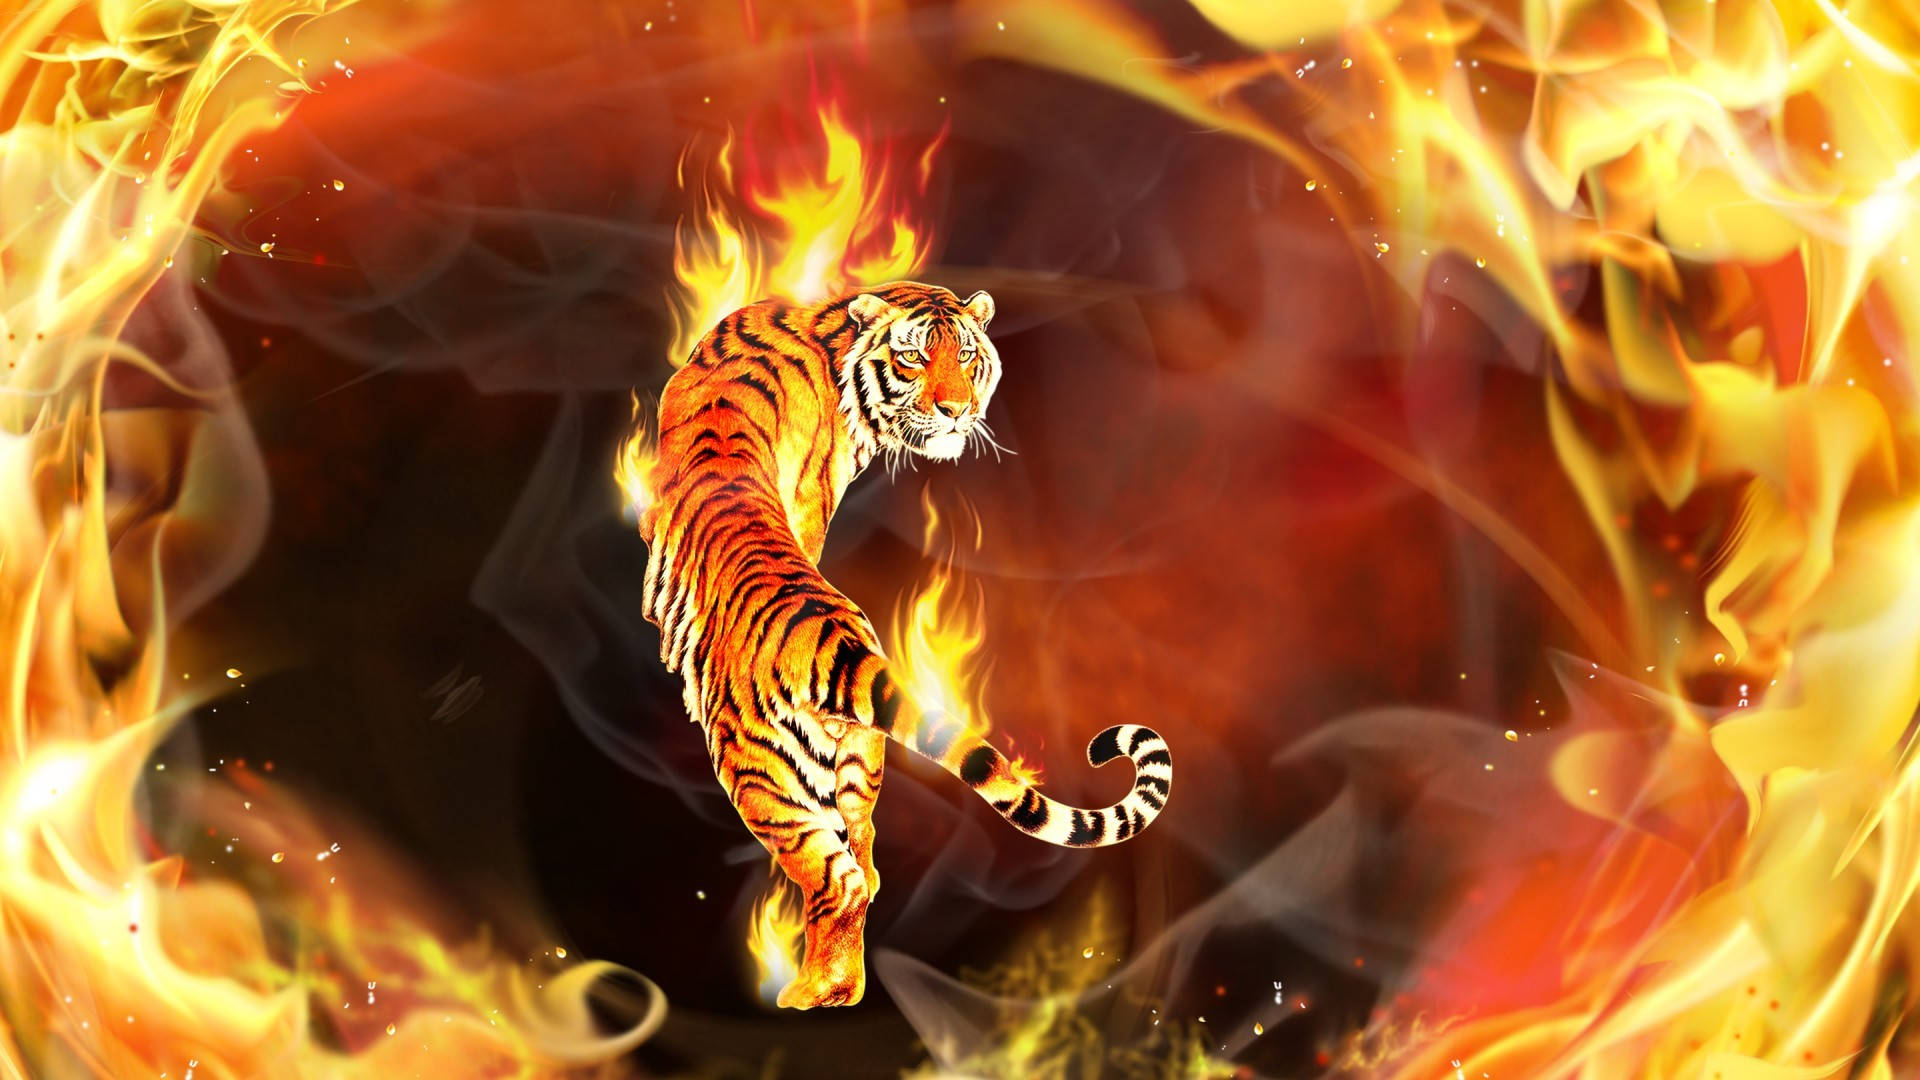 On Fire Tiger Background